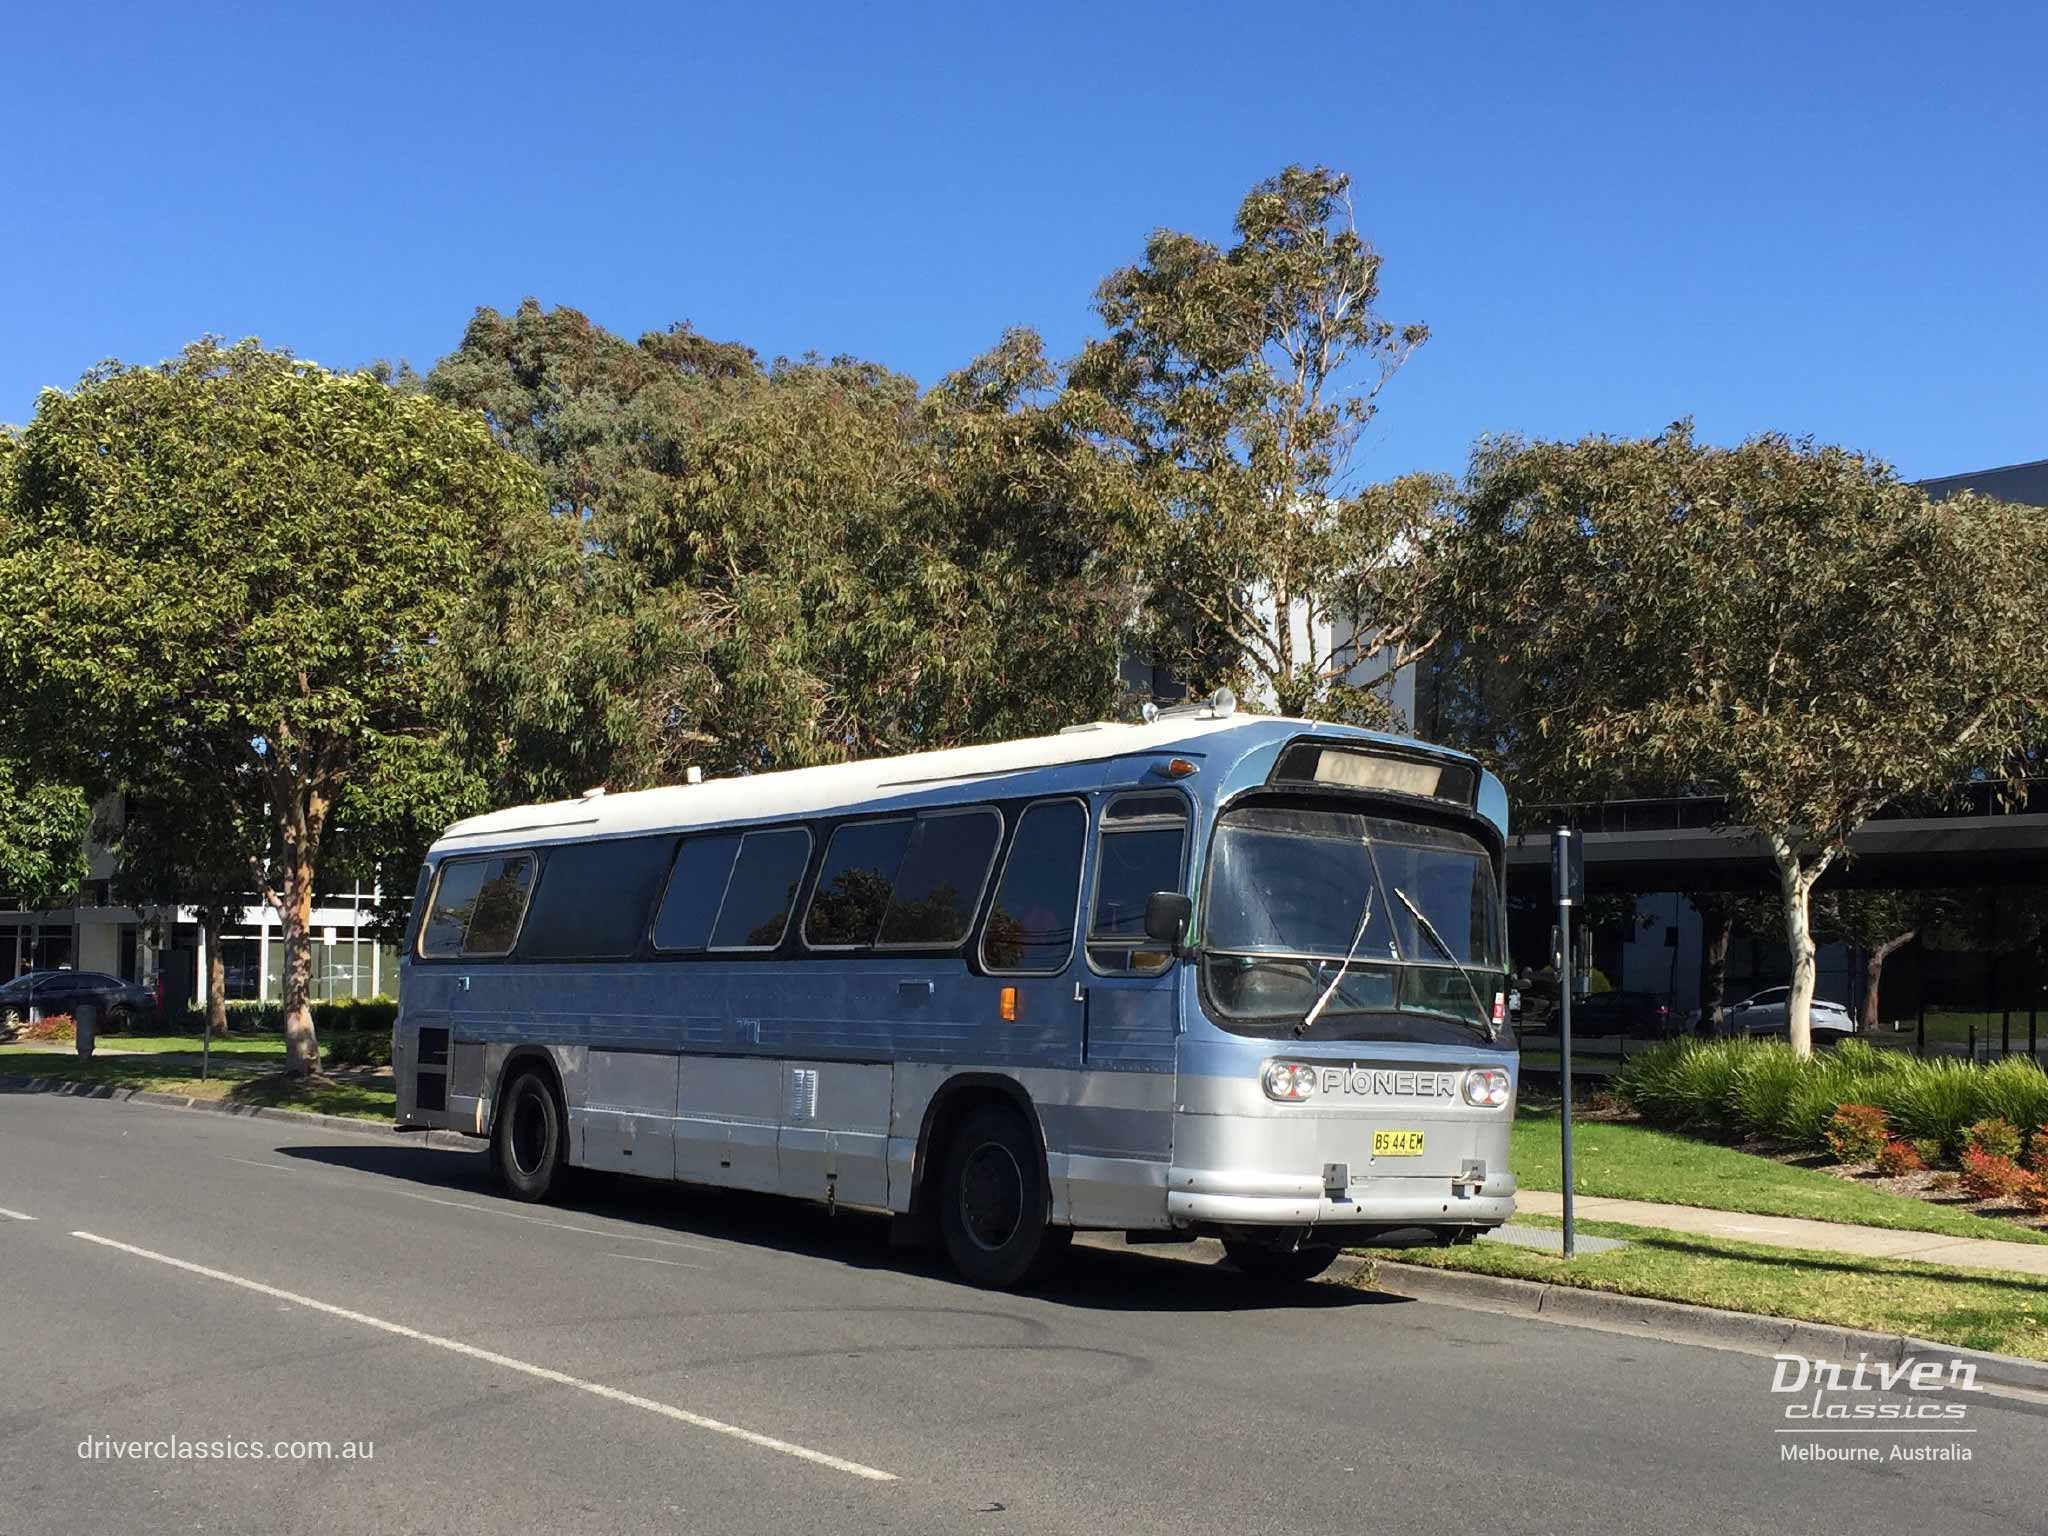 Ansair Scenicruiser bus, GMC 1967 version, front and side, on Ricketts Rd, August 2018